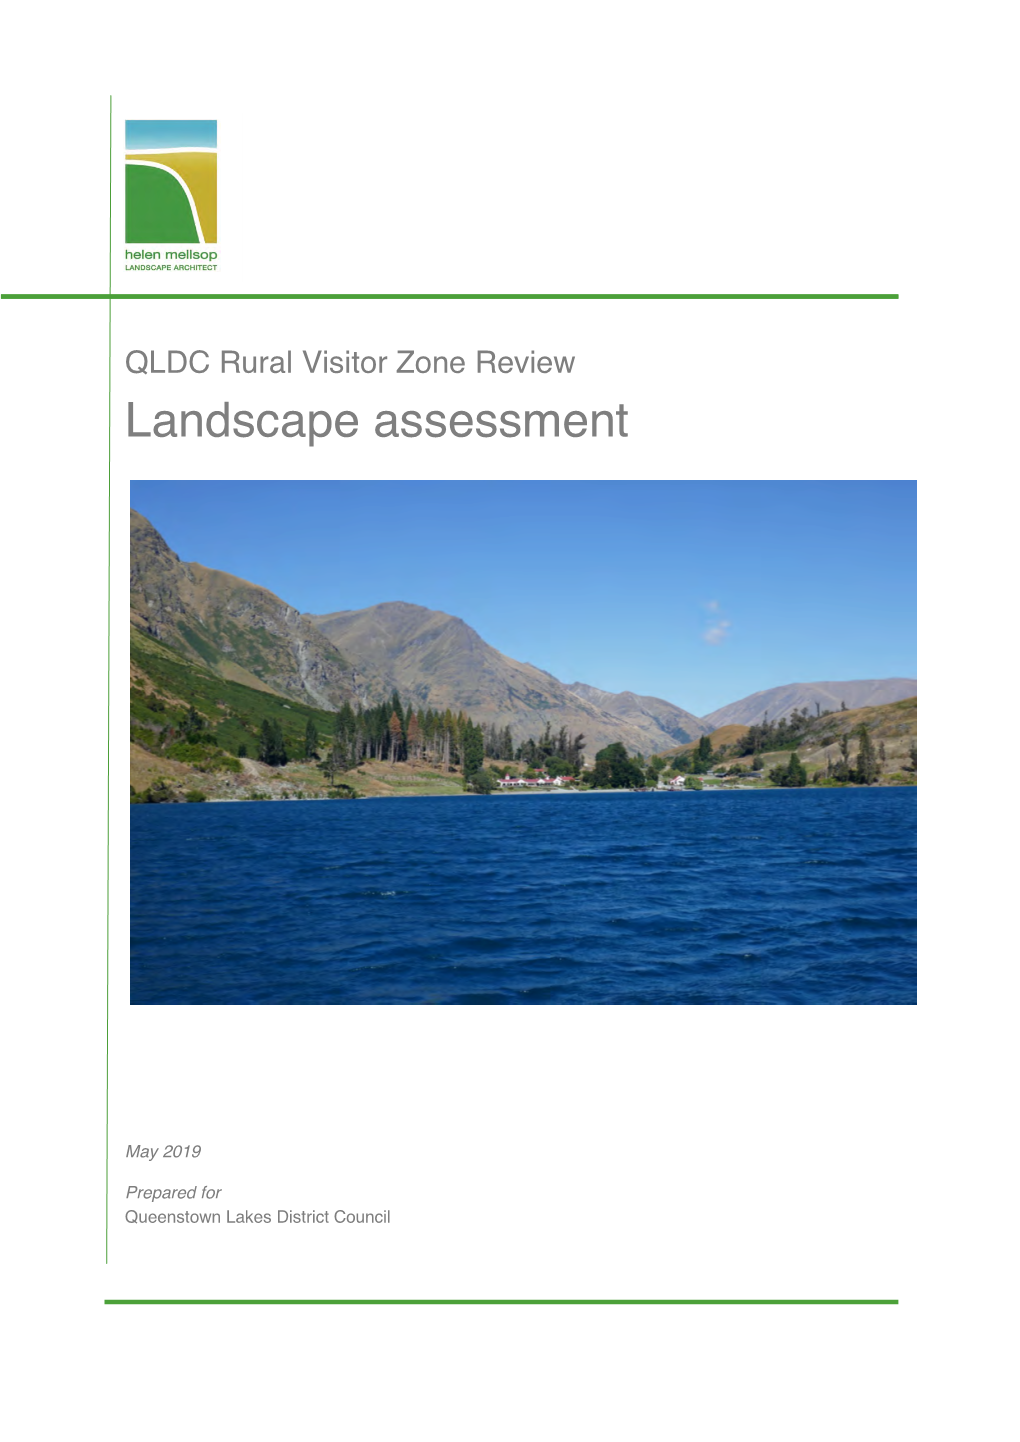 QLDC Rural Visitor Zone Review Landscape Assessment